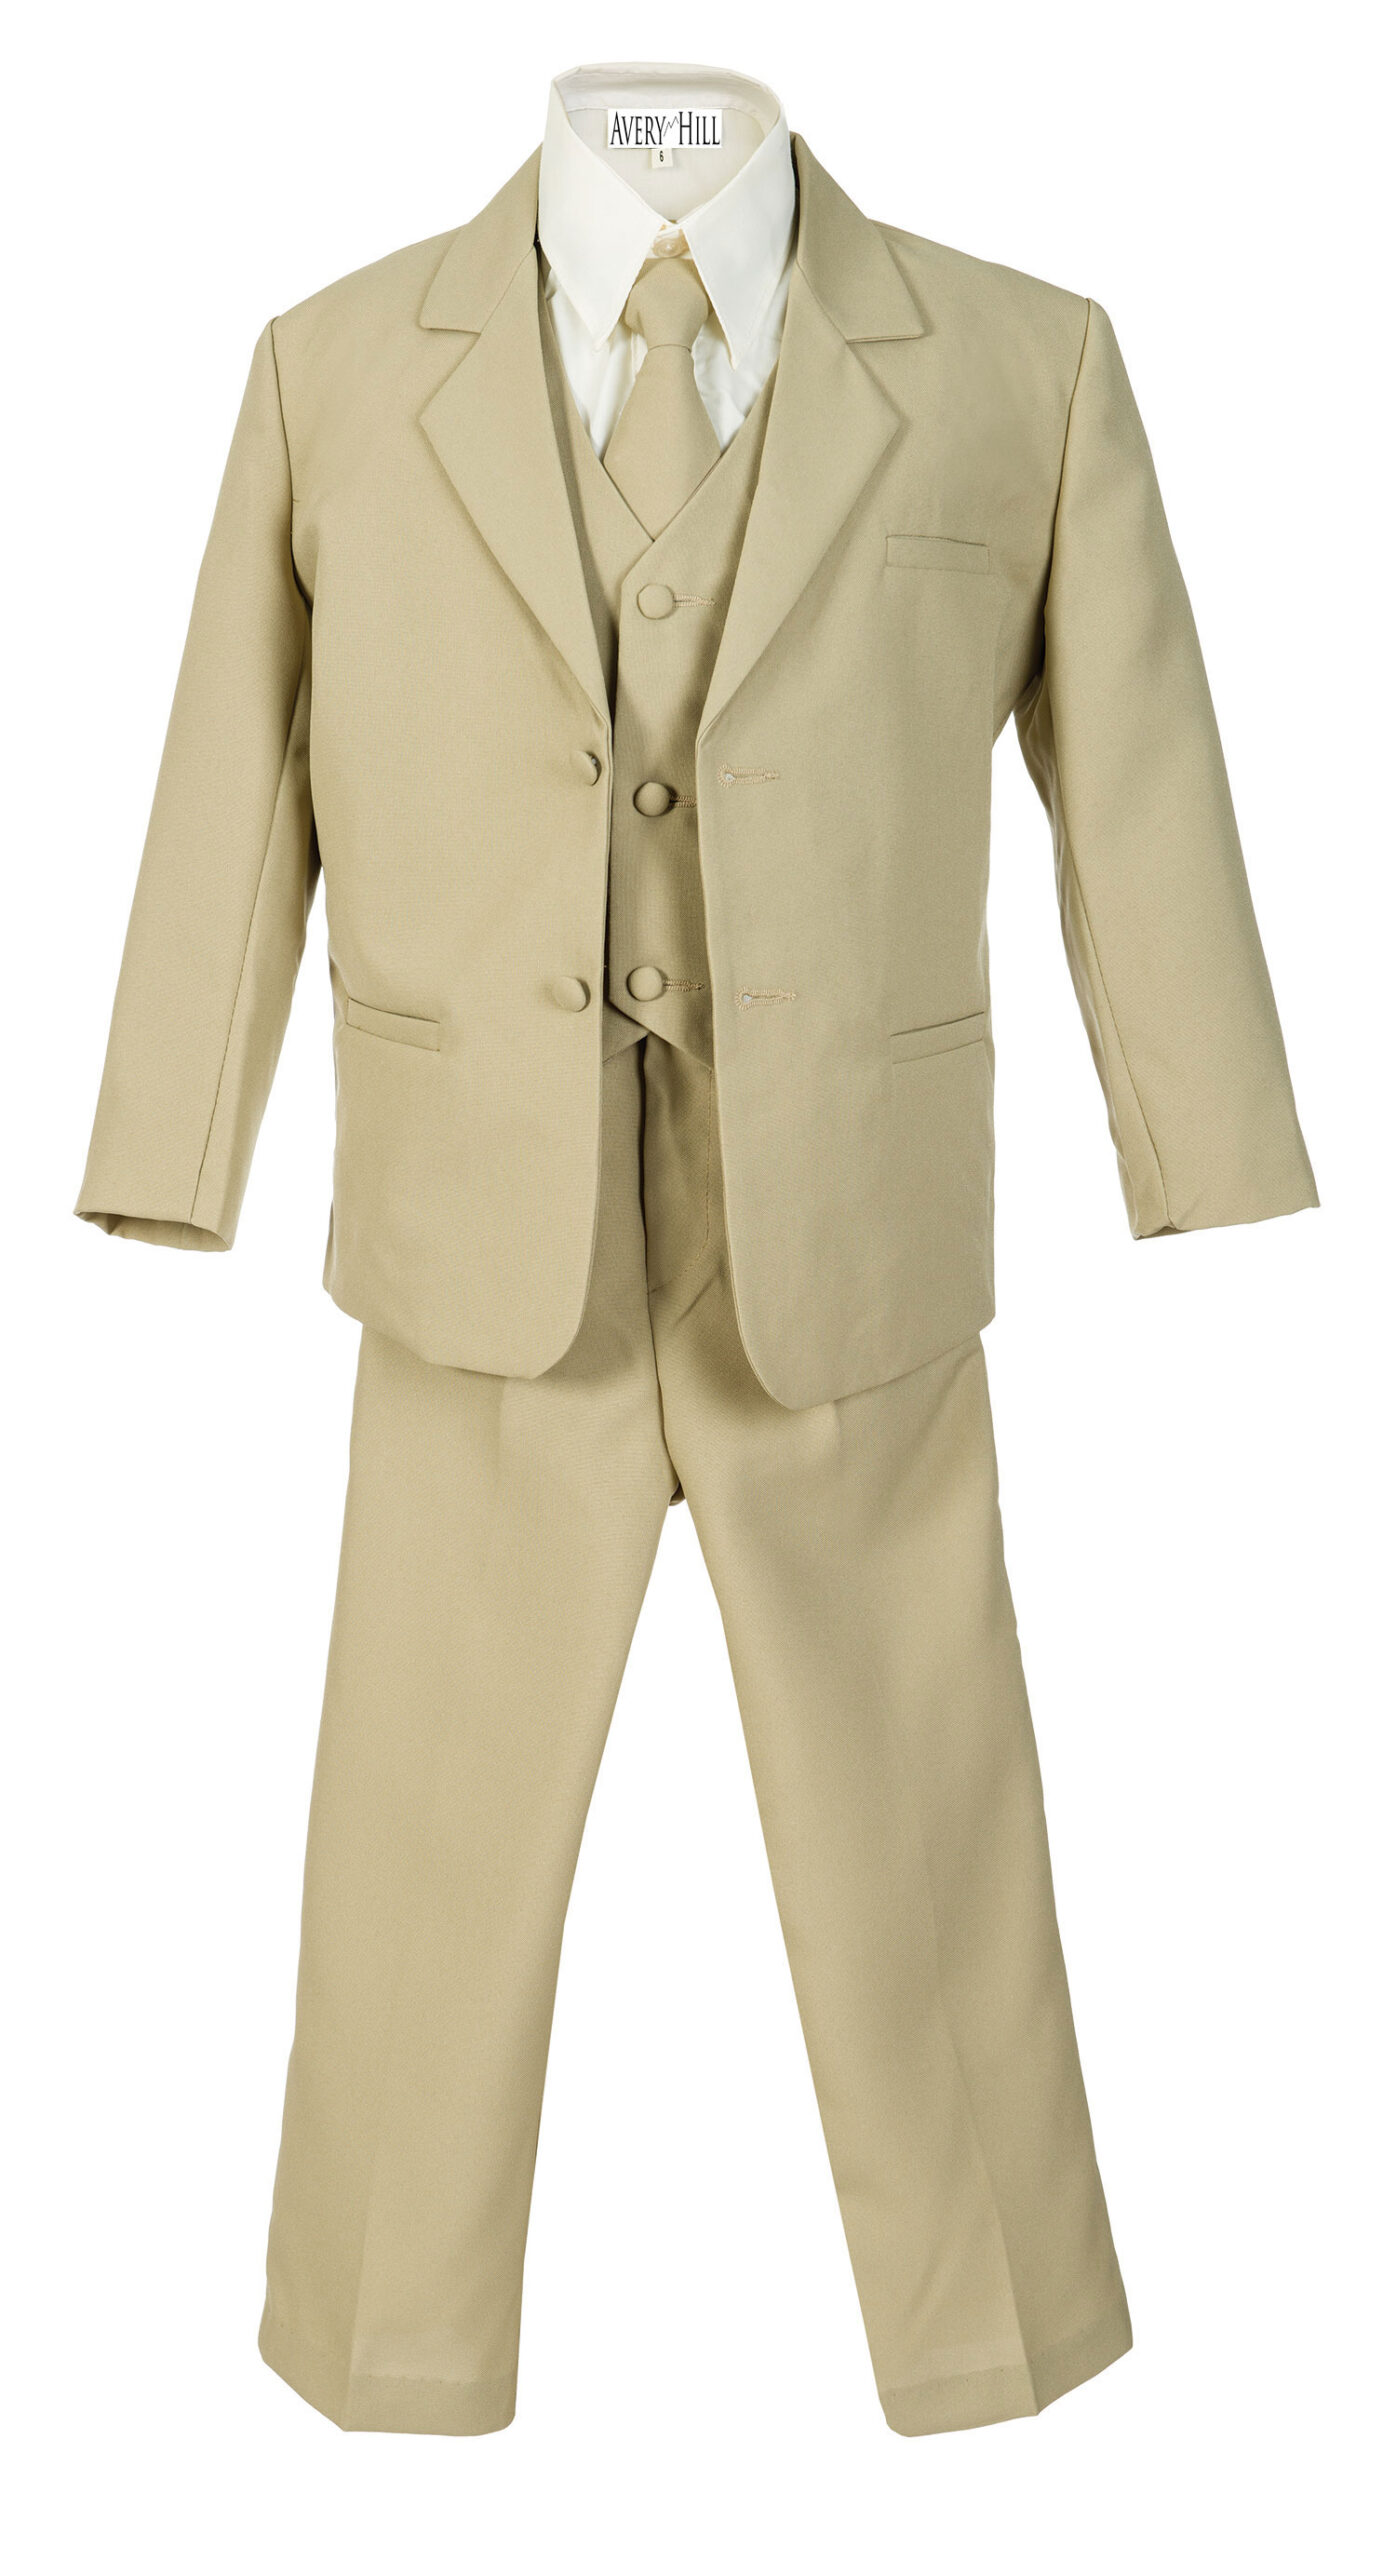 Avery Hill Boys Formal 5 Piece Suit with Shirt and Vest Khaki - 3T